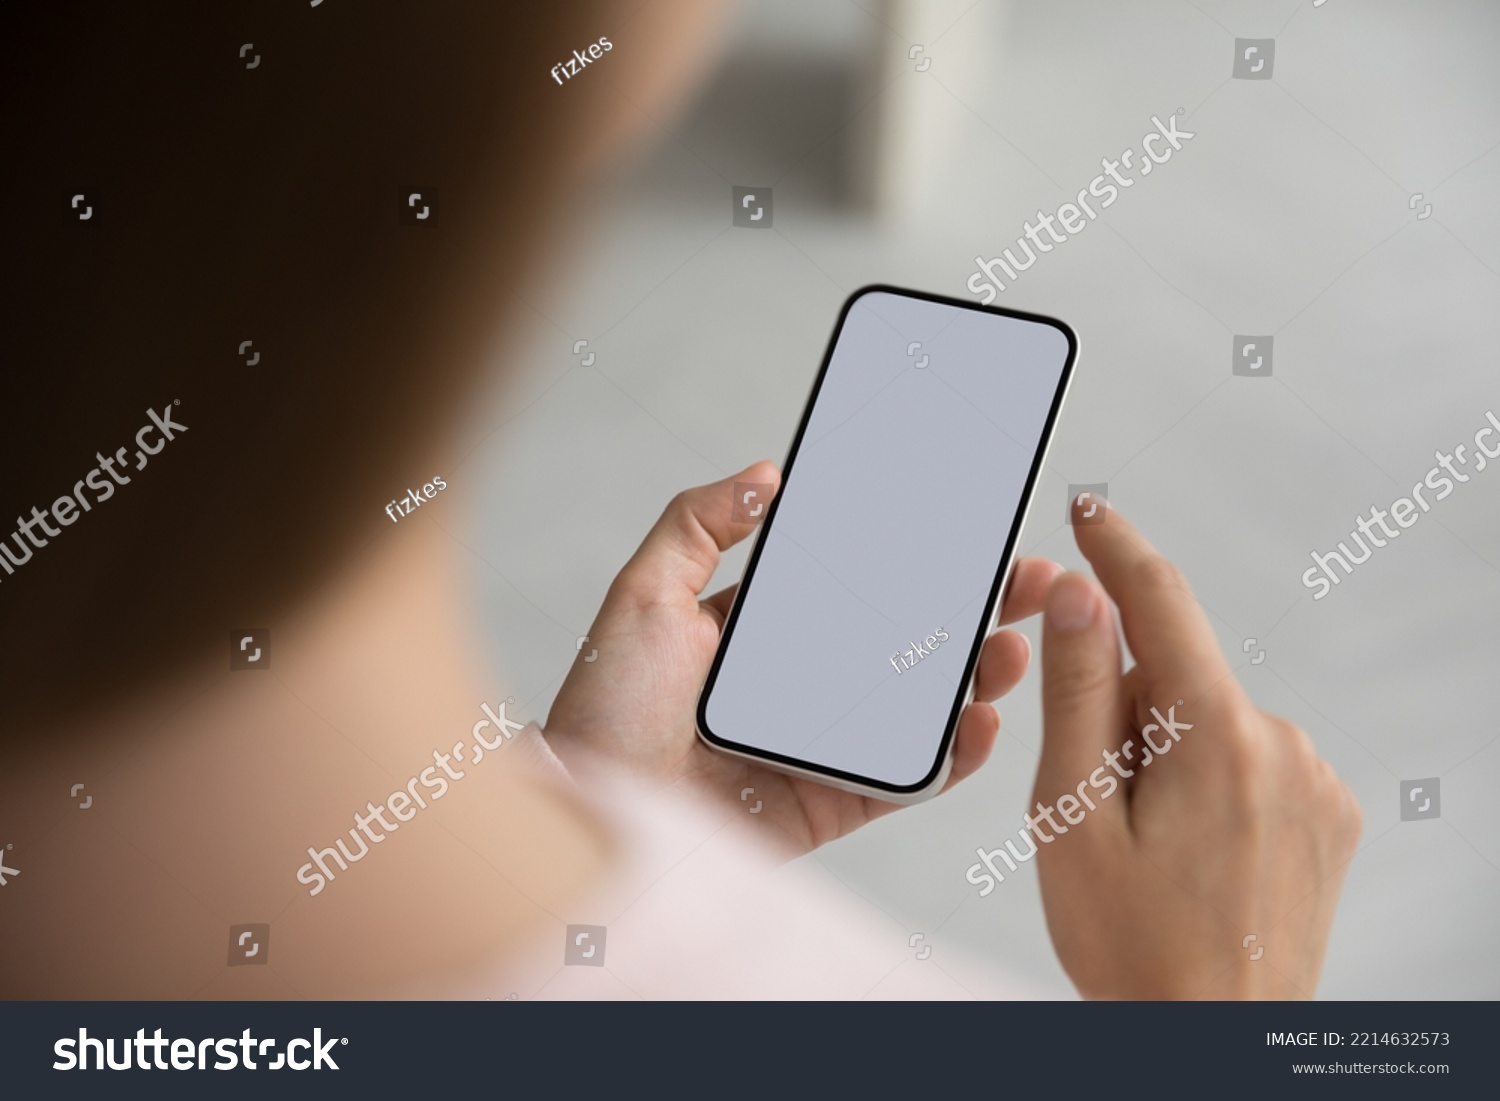 Unknown woman holds mart phone with white blank mock up screen view, close up. Female using web site, makes call, order goods, enjoy remote comfort services, advertising new application or software #2214632573